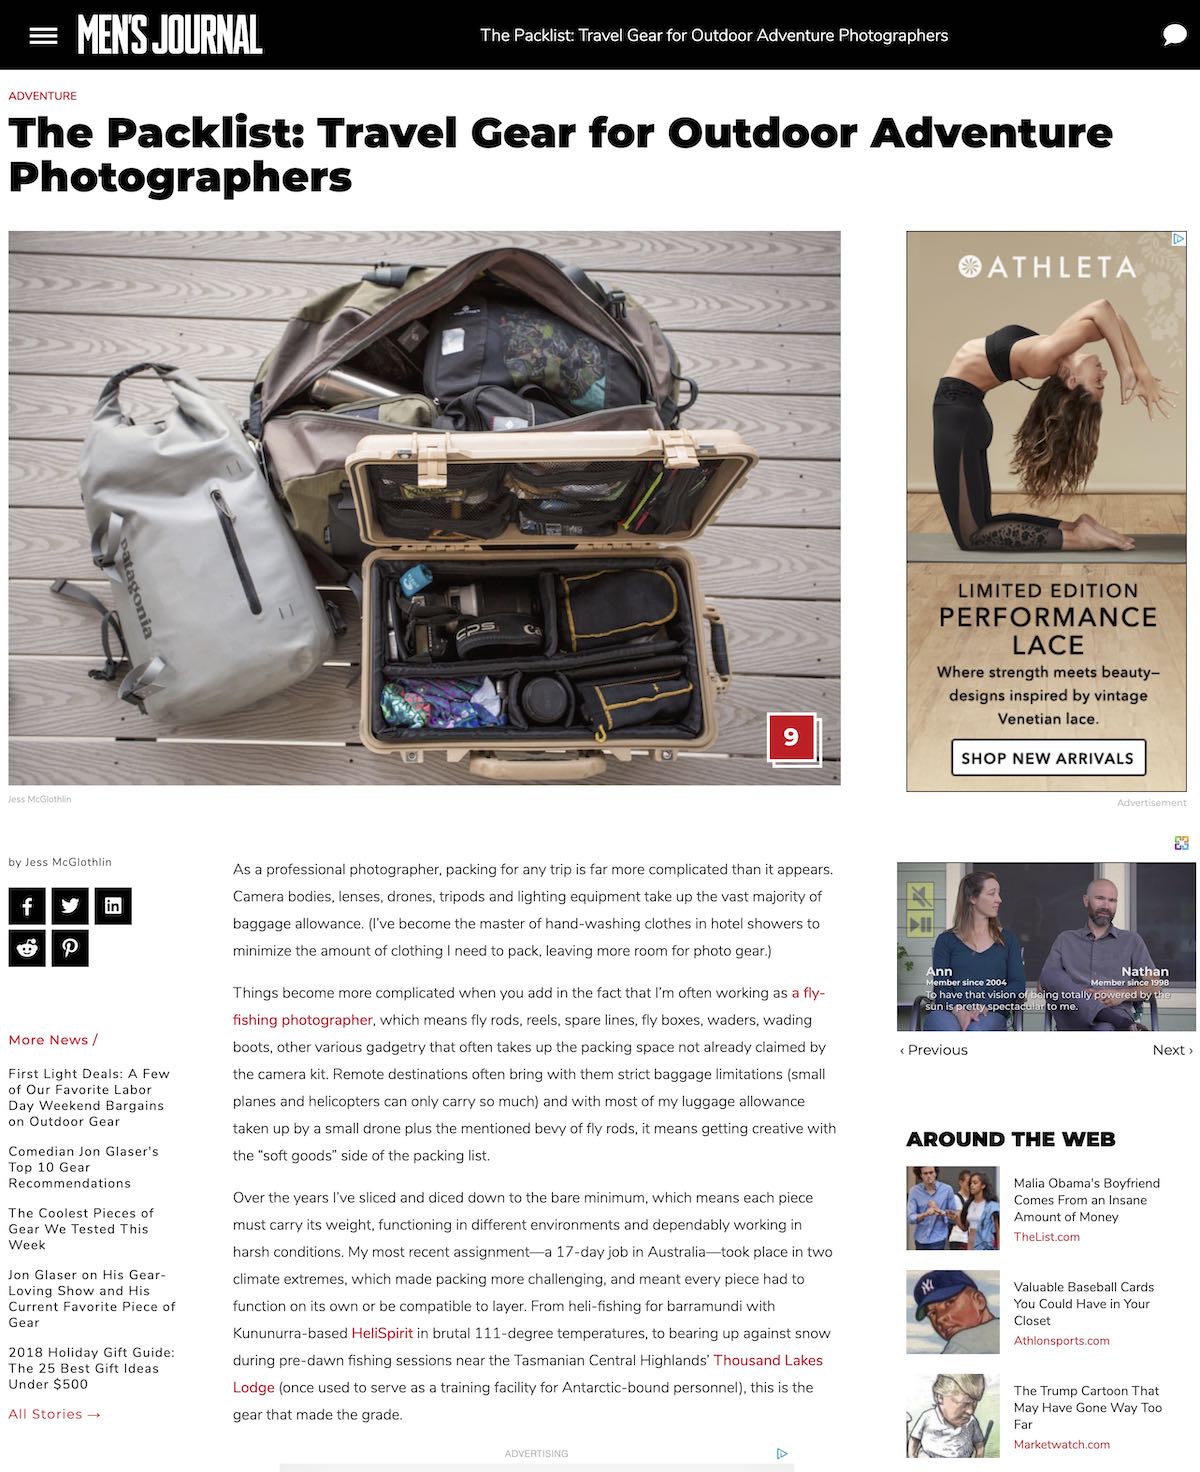 Packing list for outdoor adventure photographers on Men's Journal. Photo of packs bags and camera bags.